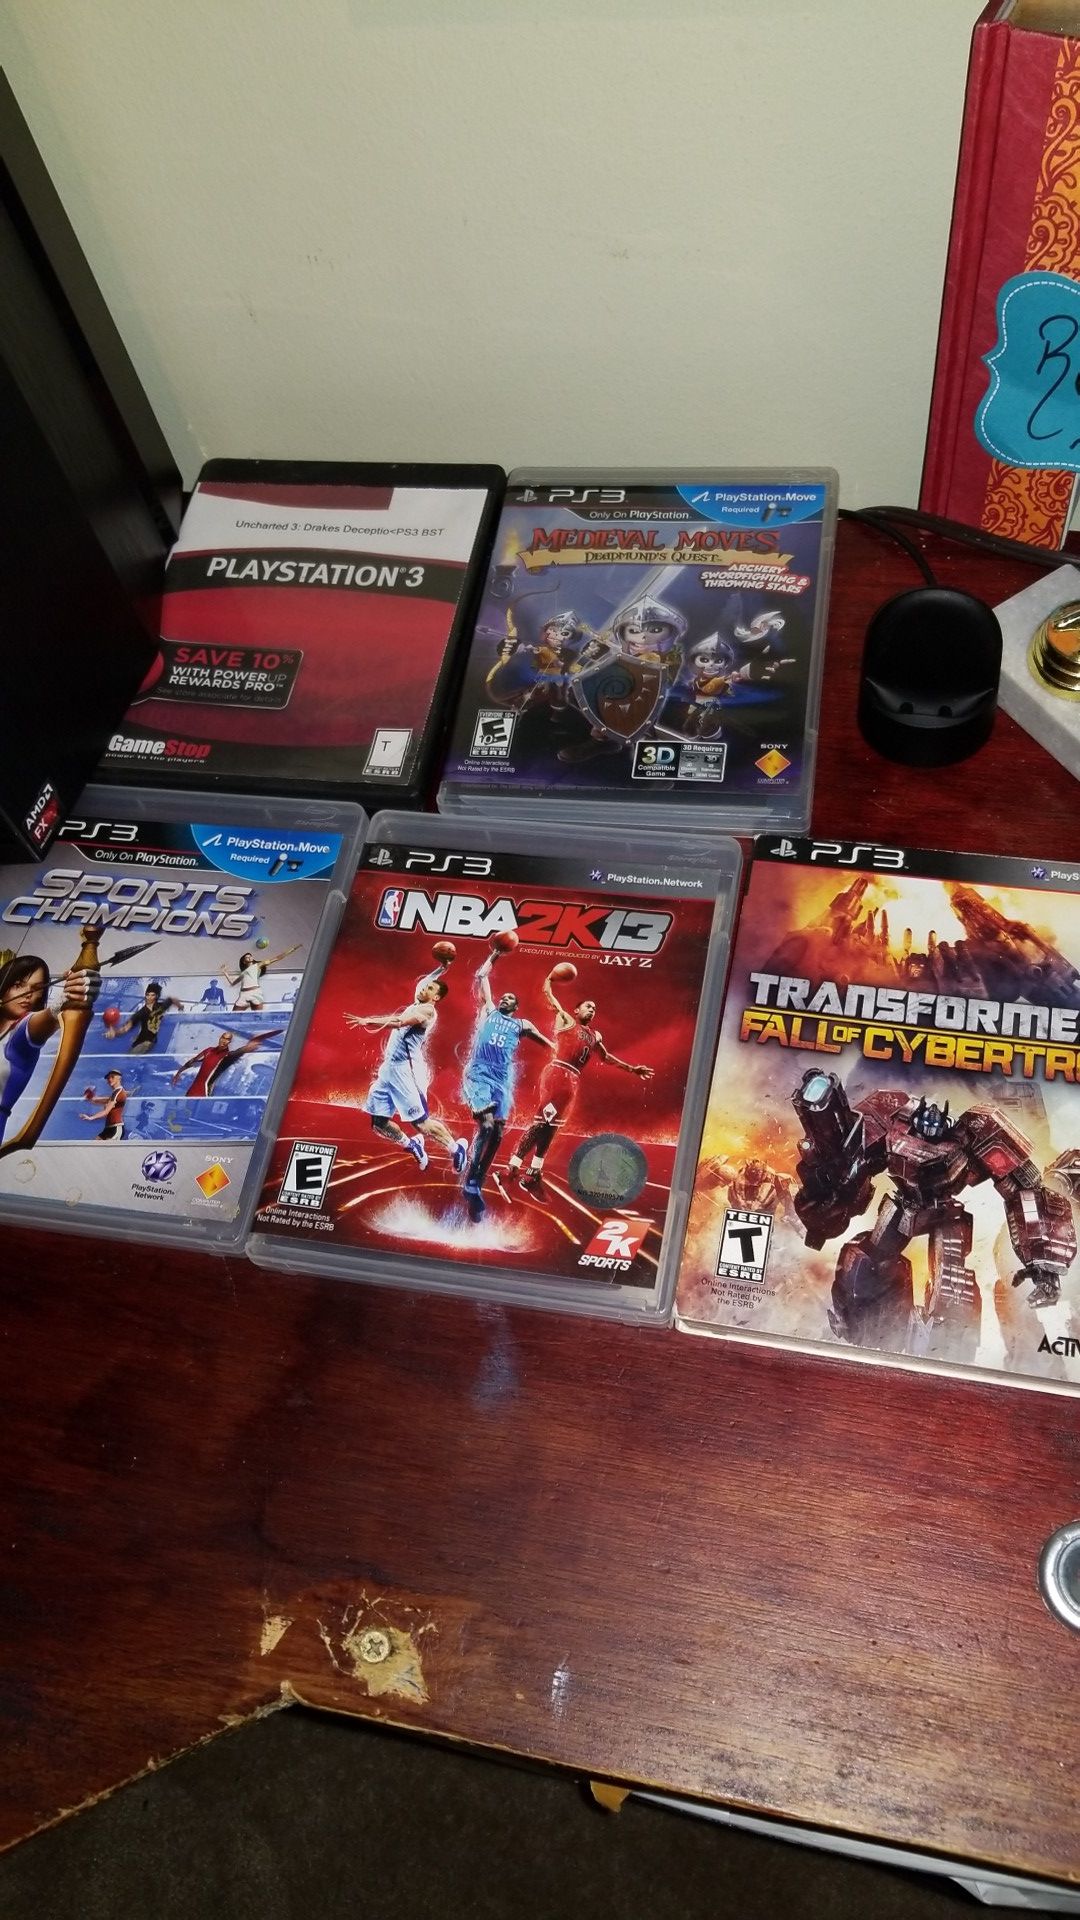 5 PS3 games ($10 for ALL of them)